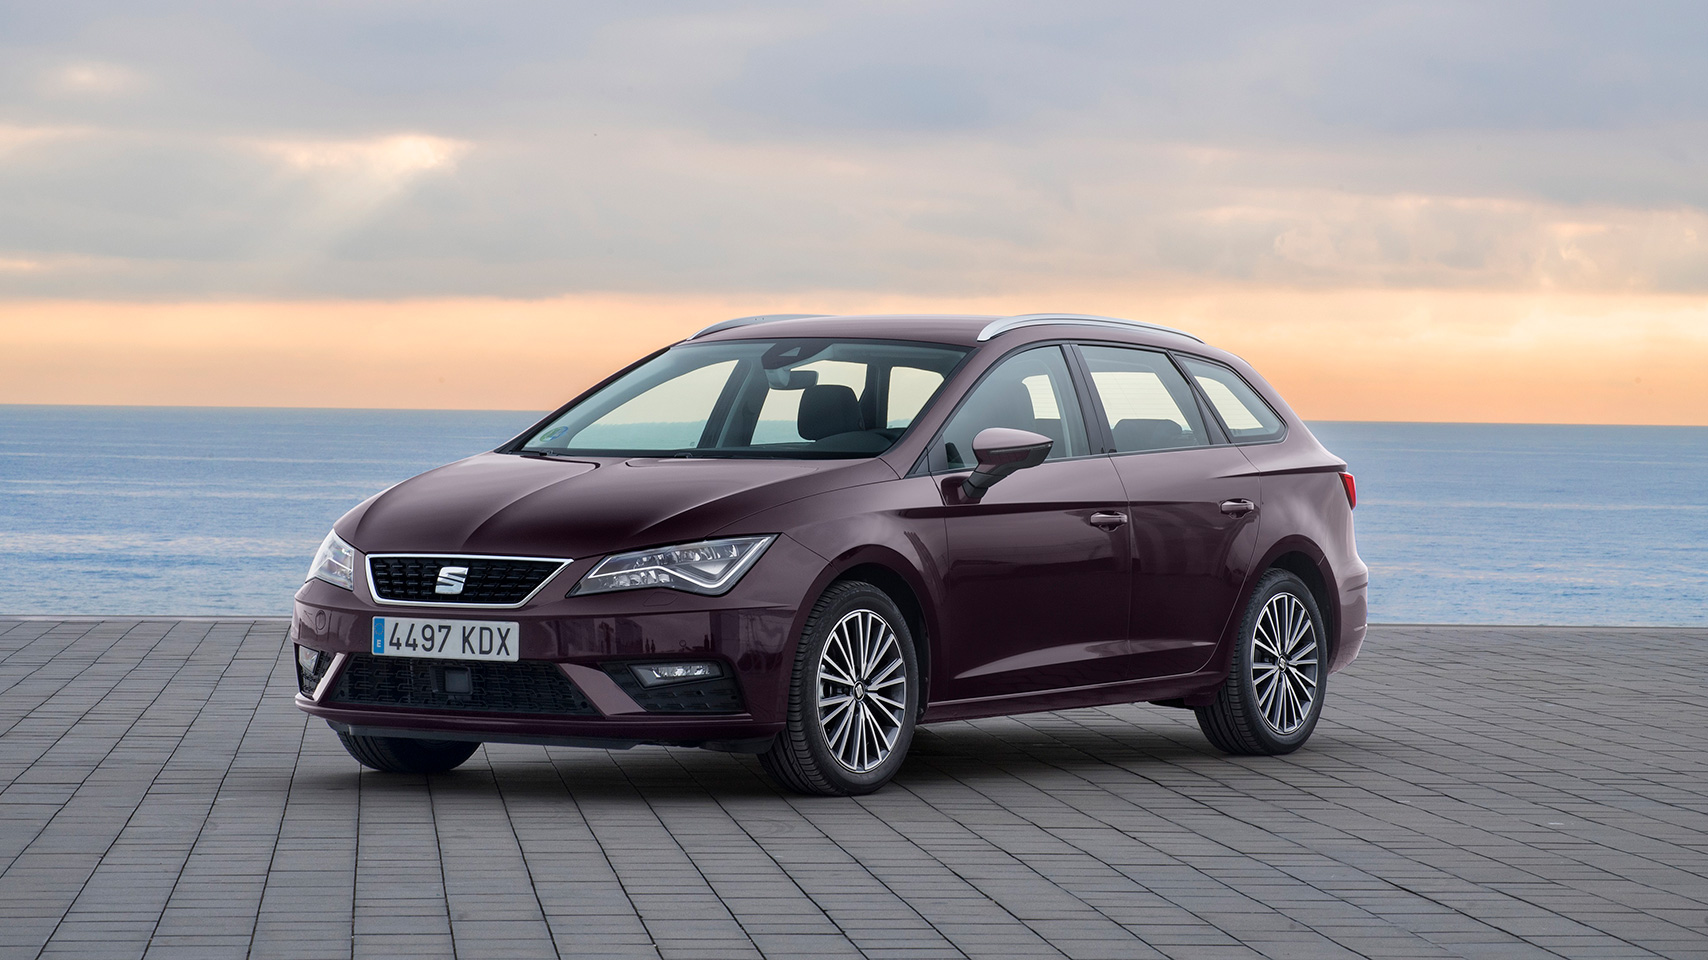 SEAT Leon parked with sea behind